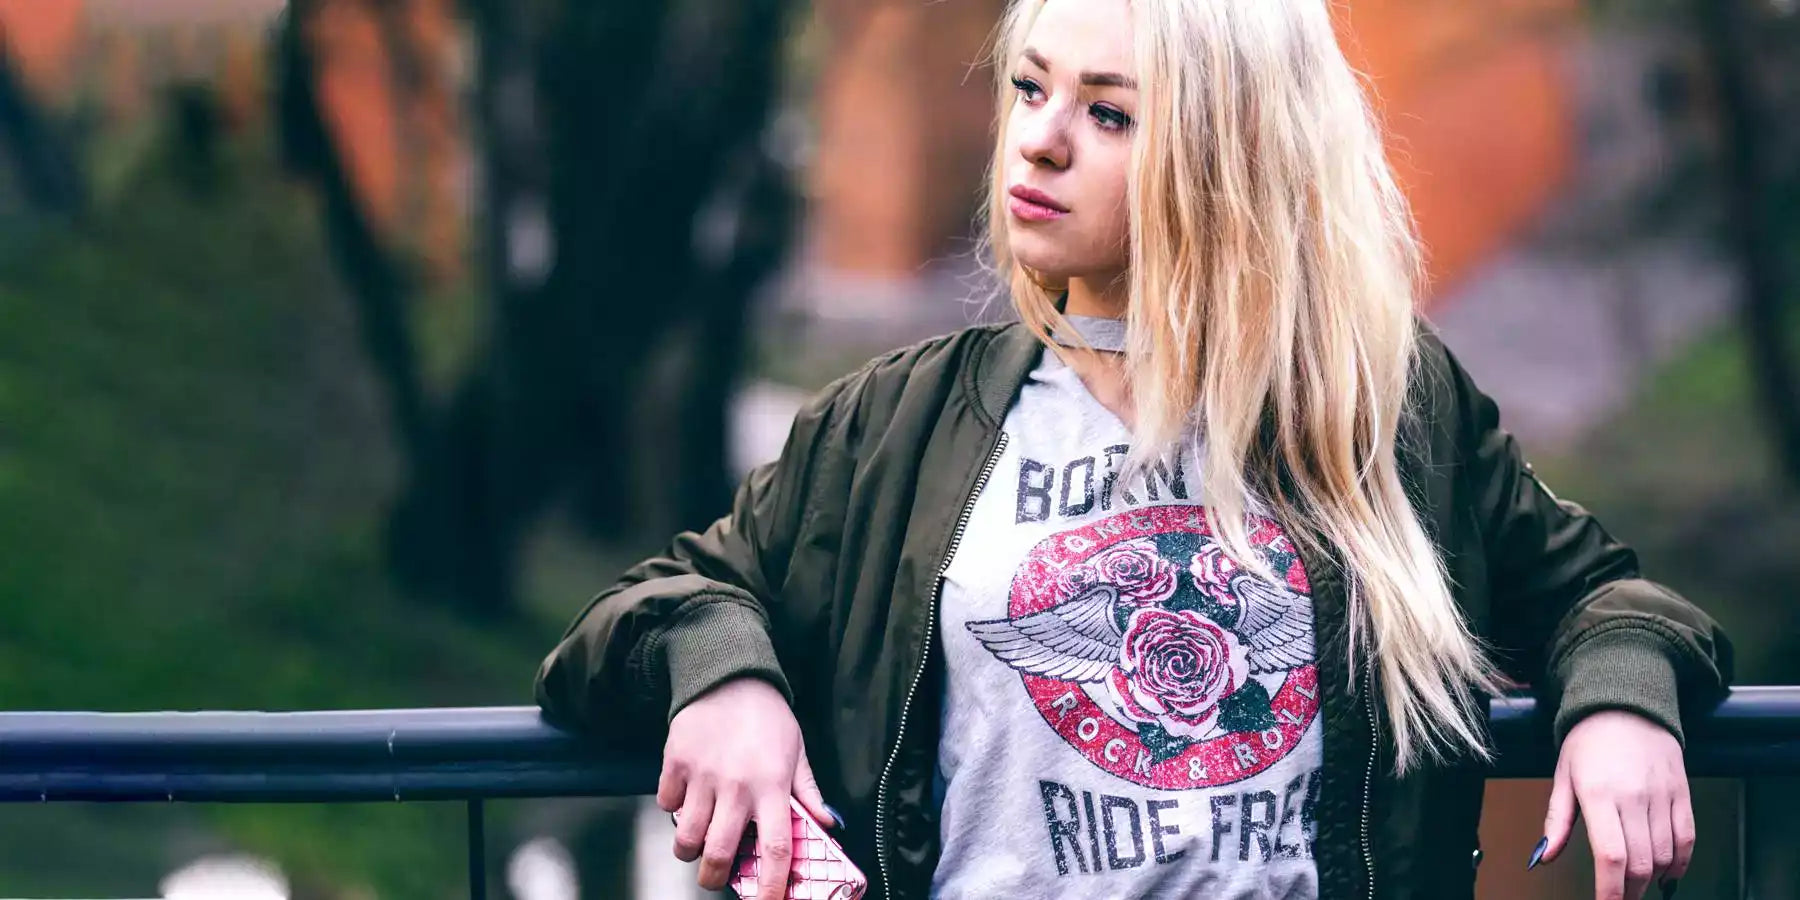 Blond woman wearing an olive colour bomber jacket, underneath a grey t-shirt with a print. The print is roses with wings into a red circle with text - Long live rock & roll. Additional text top and bottom - Born to ride free